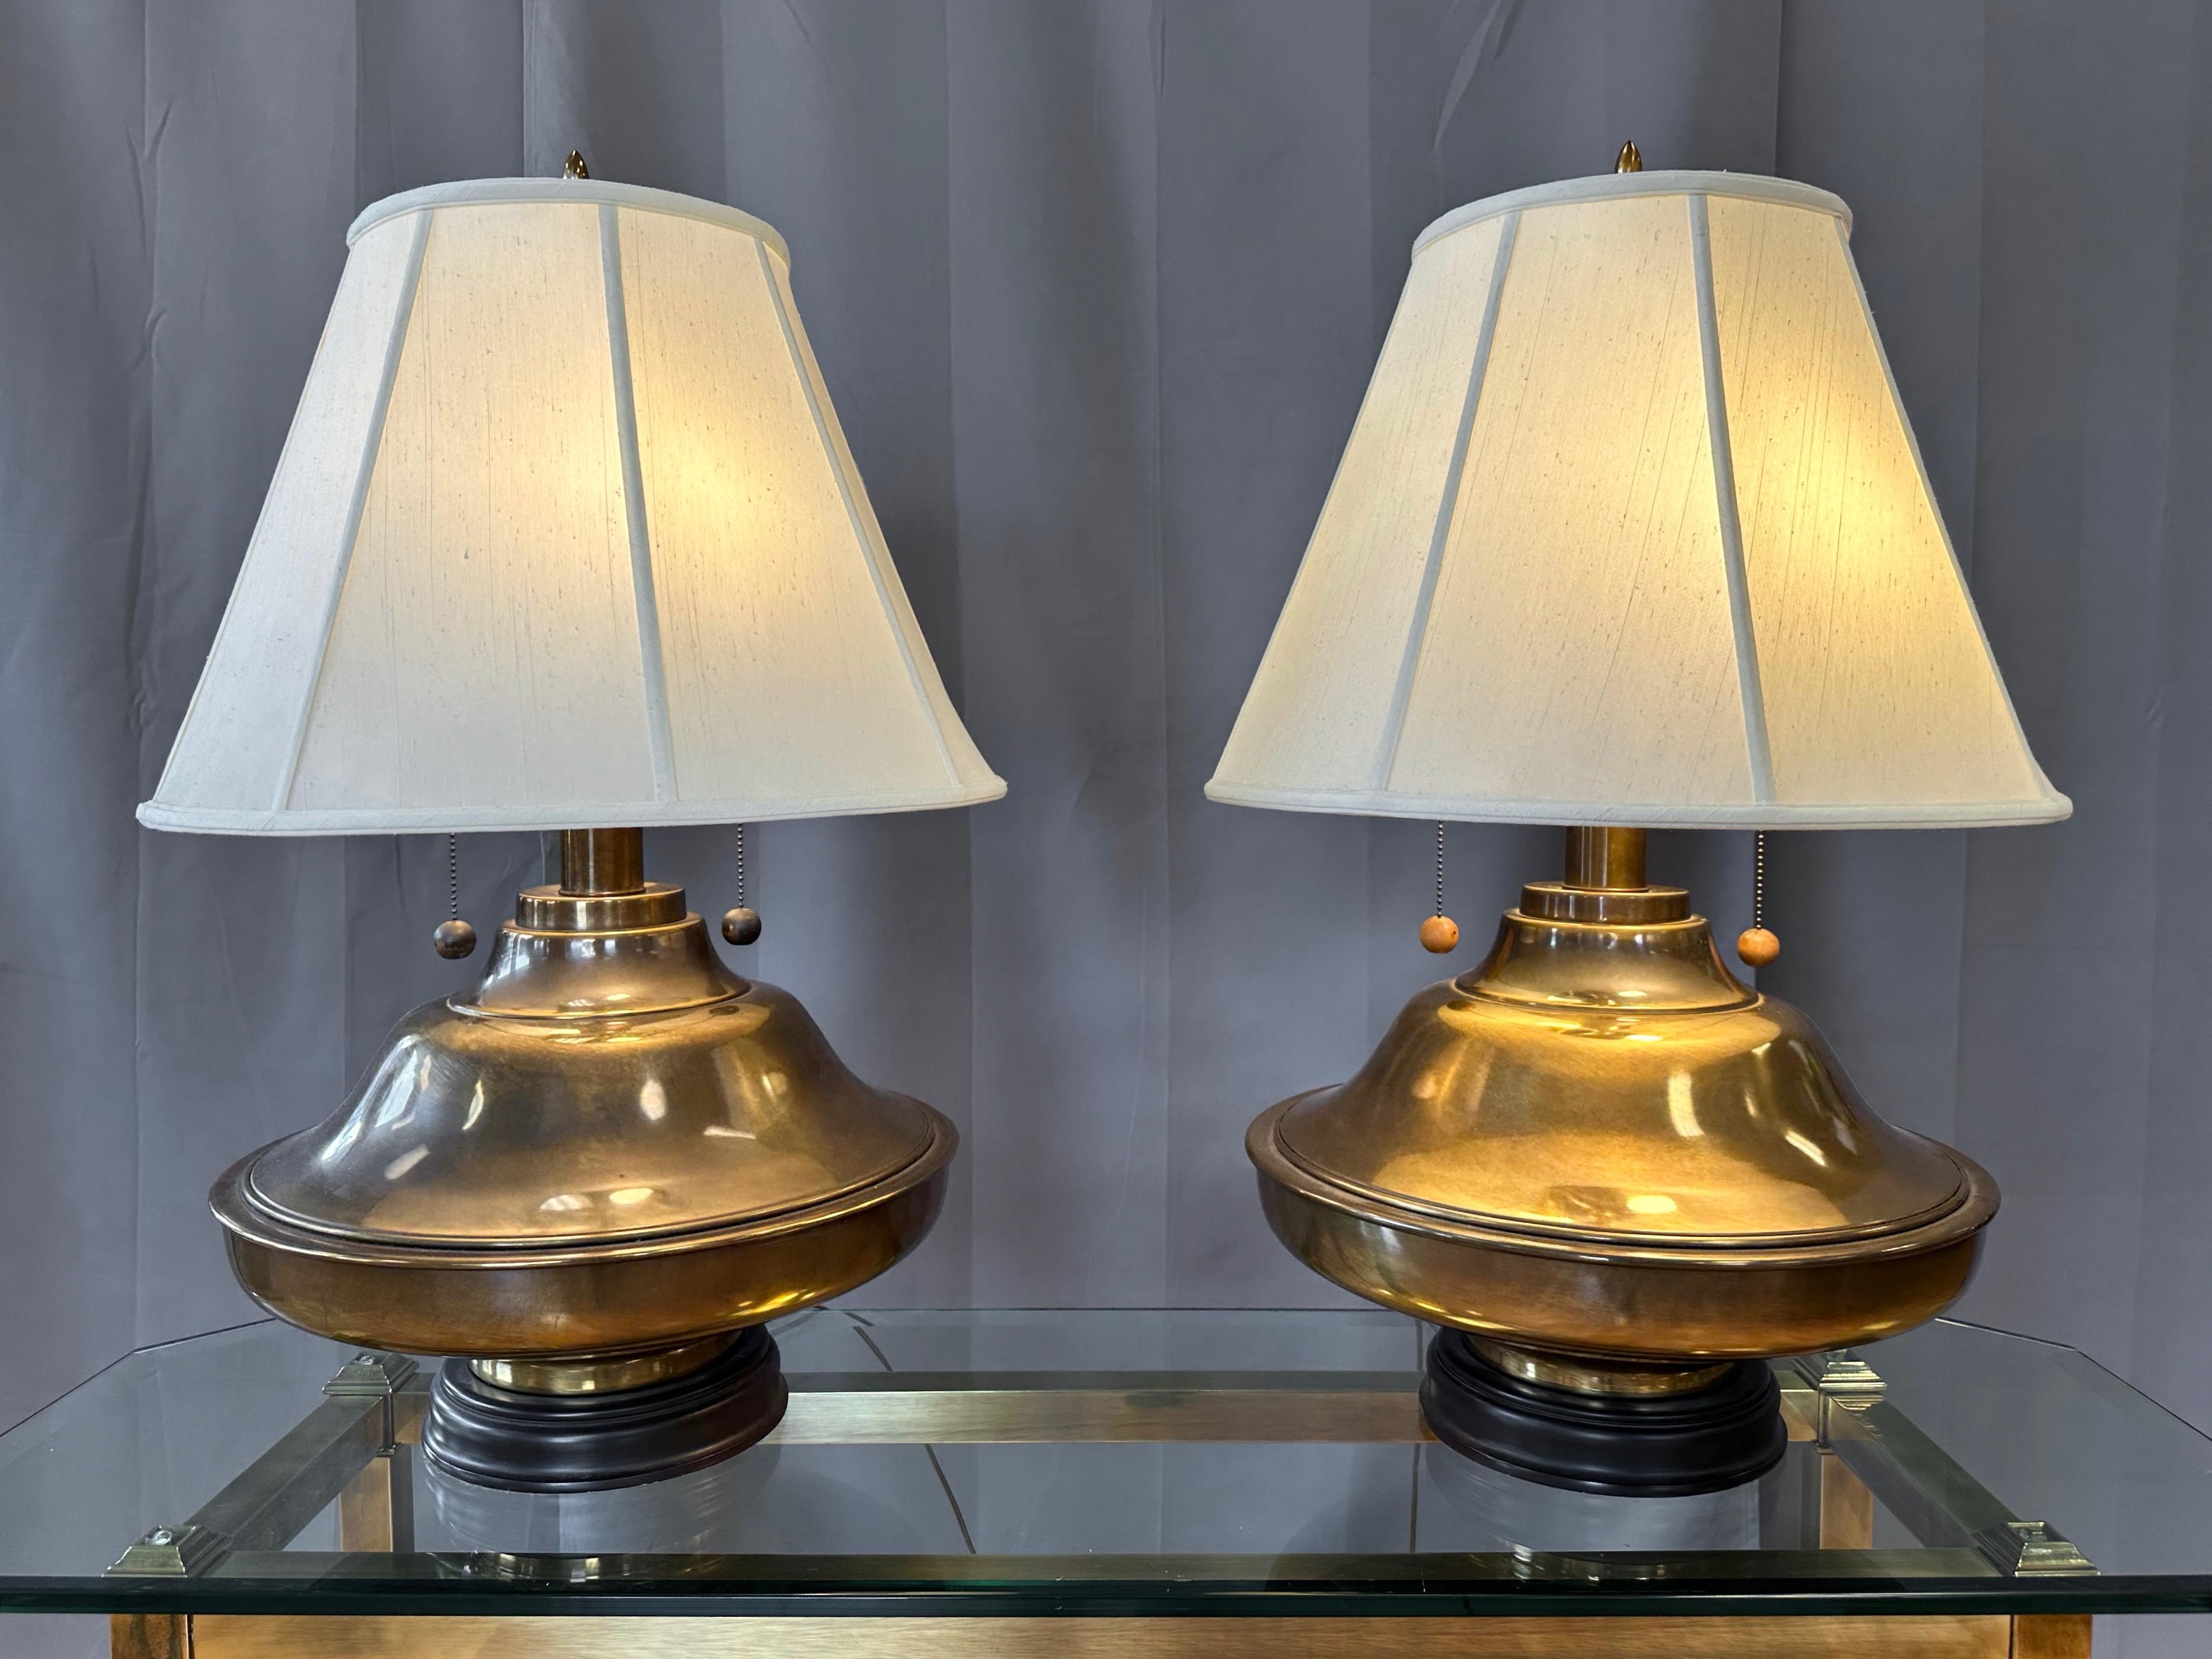 Pair of Monumental Marbro-Style Antiqued Brass Table Lamps with Shades, 1960s For Sale 2